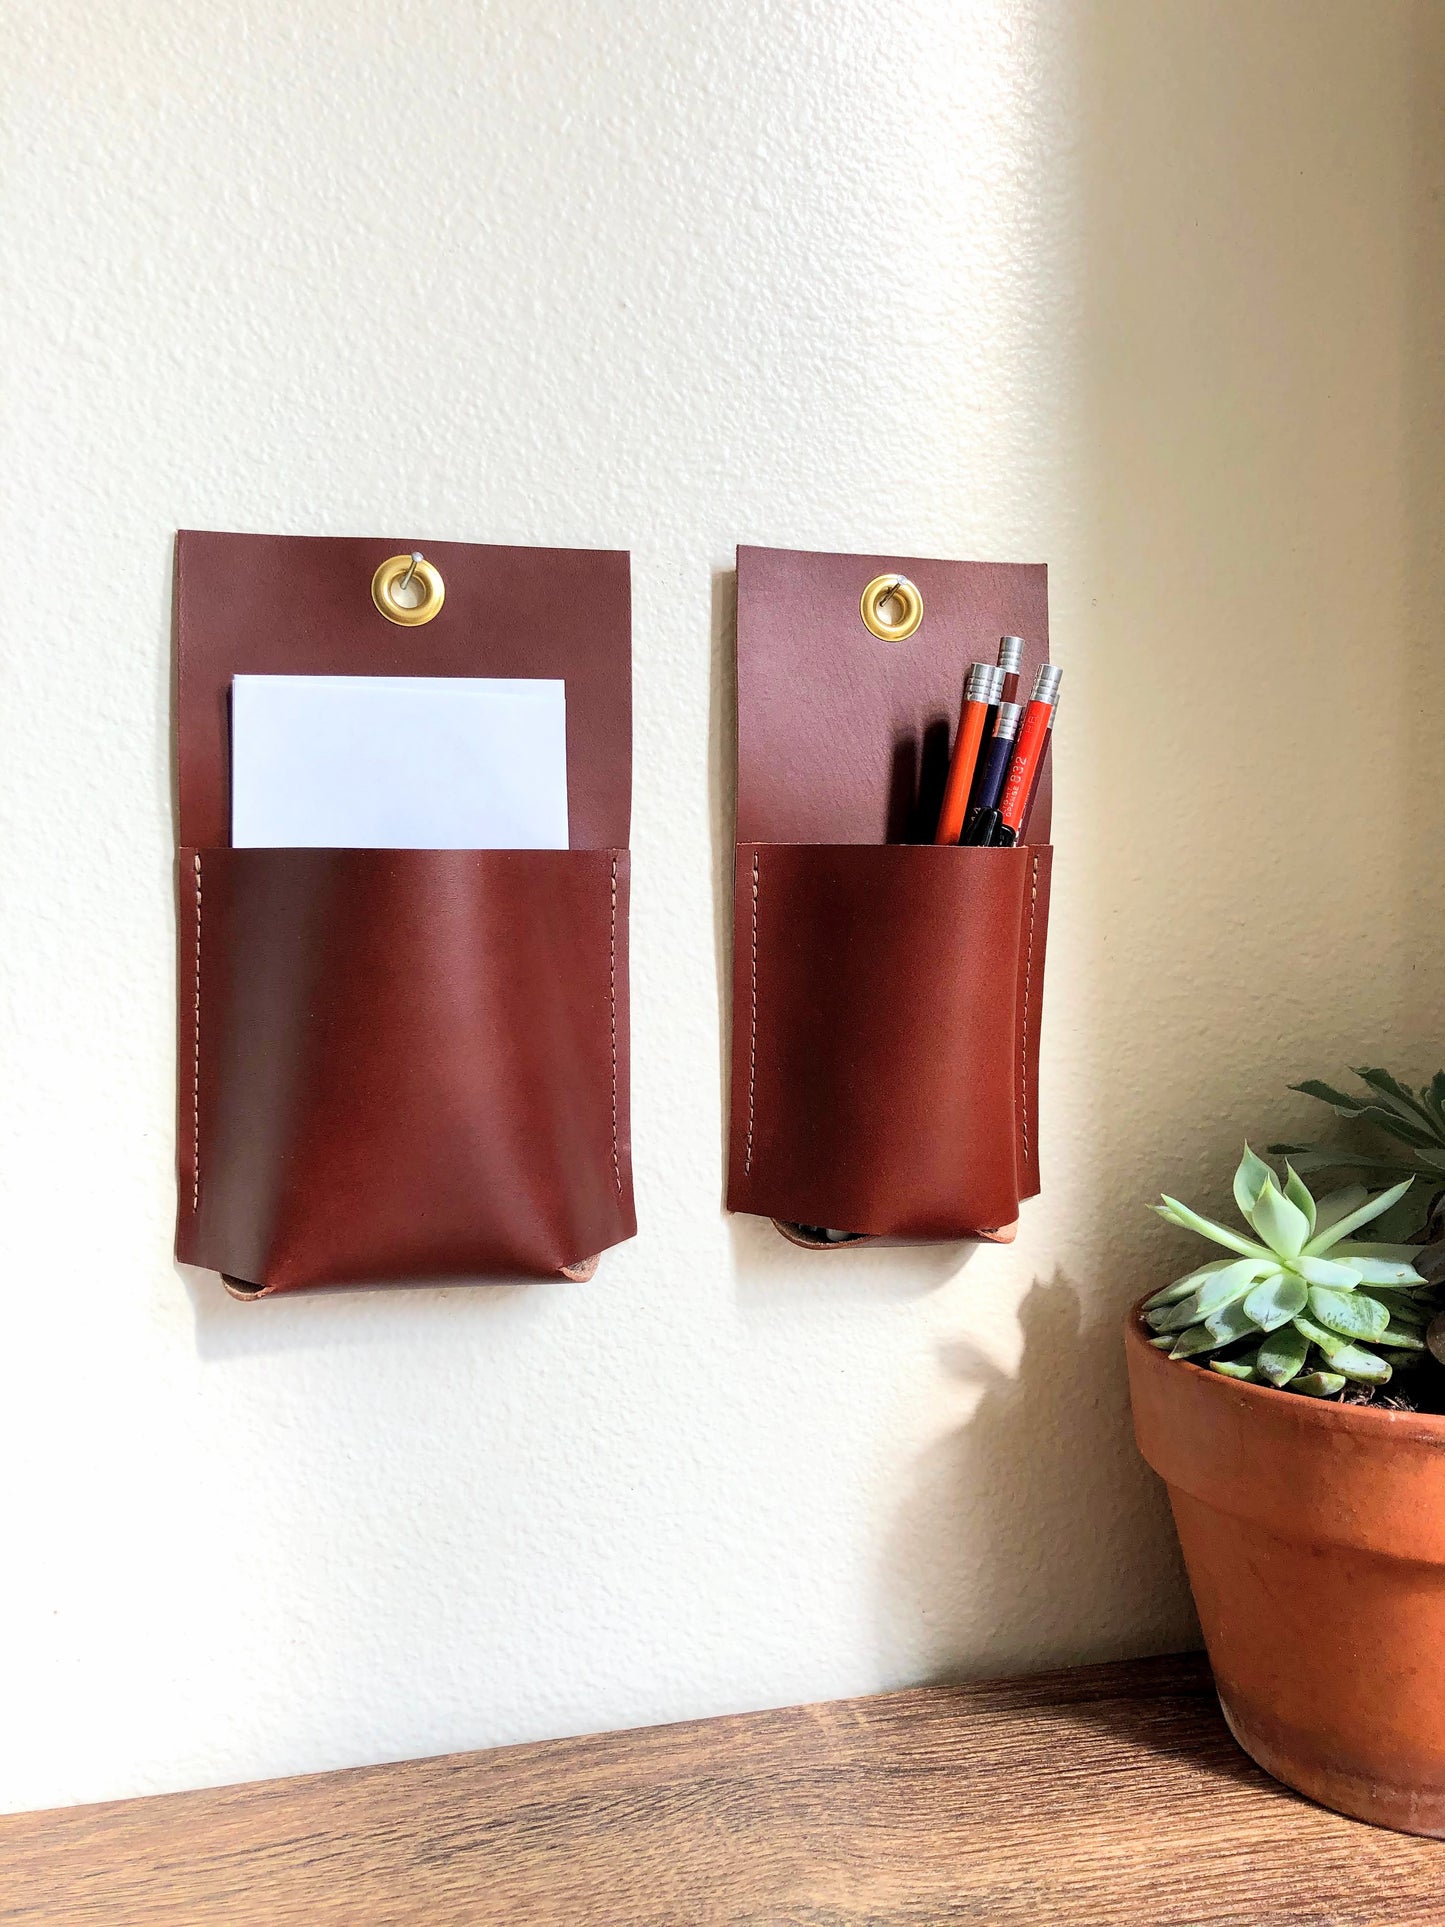 Two sizes of brown leather wall pockets are hung together near a potted plant and table.